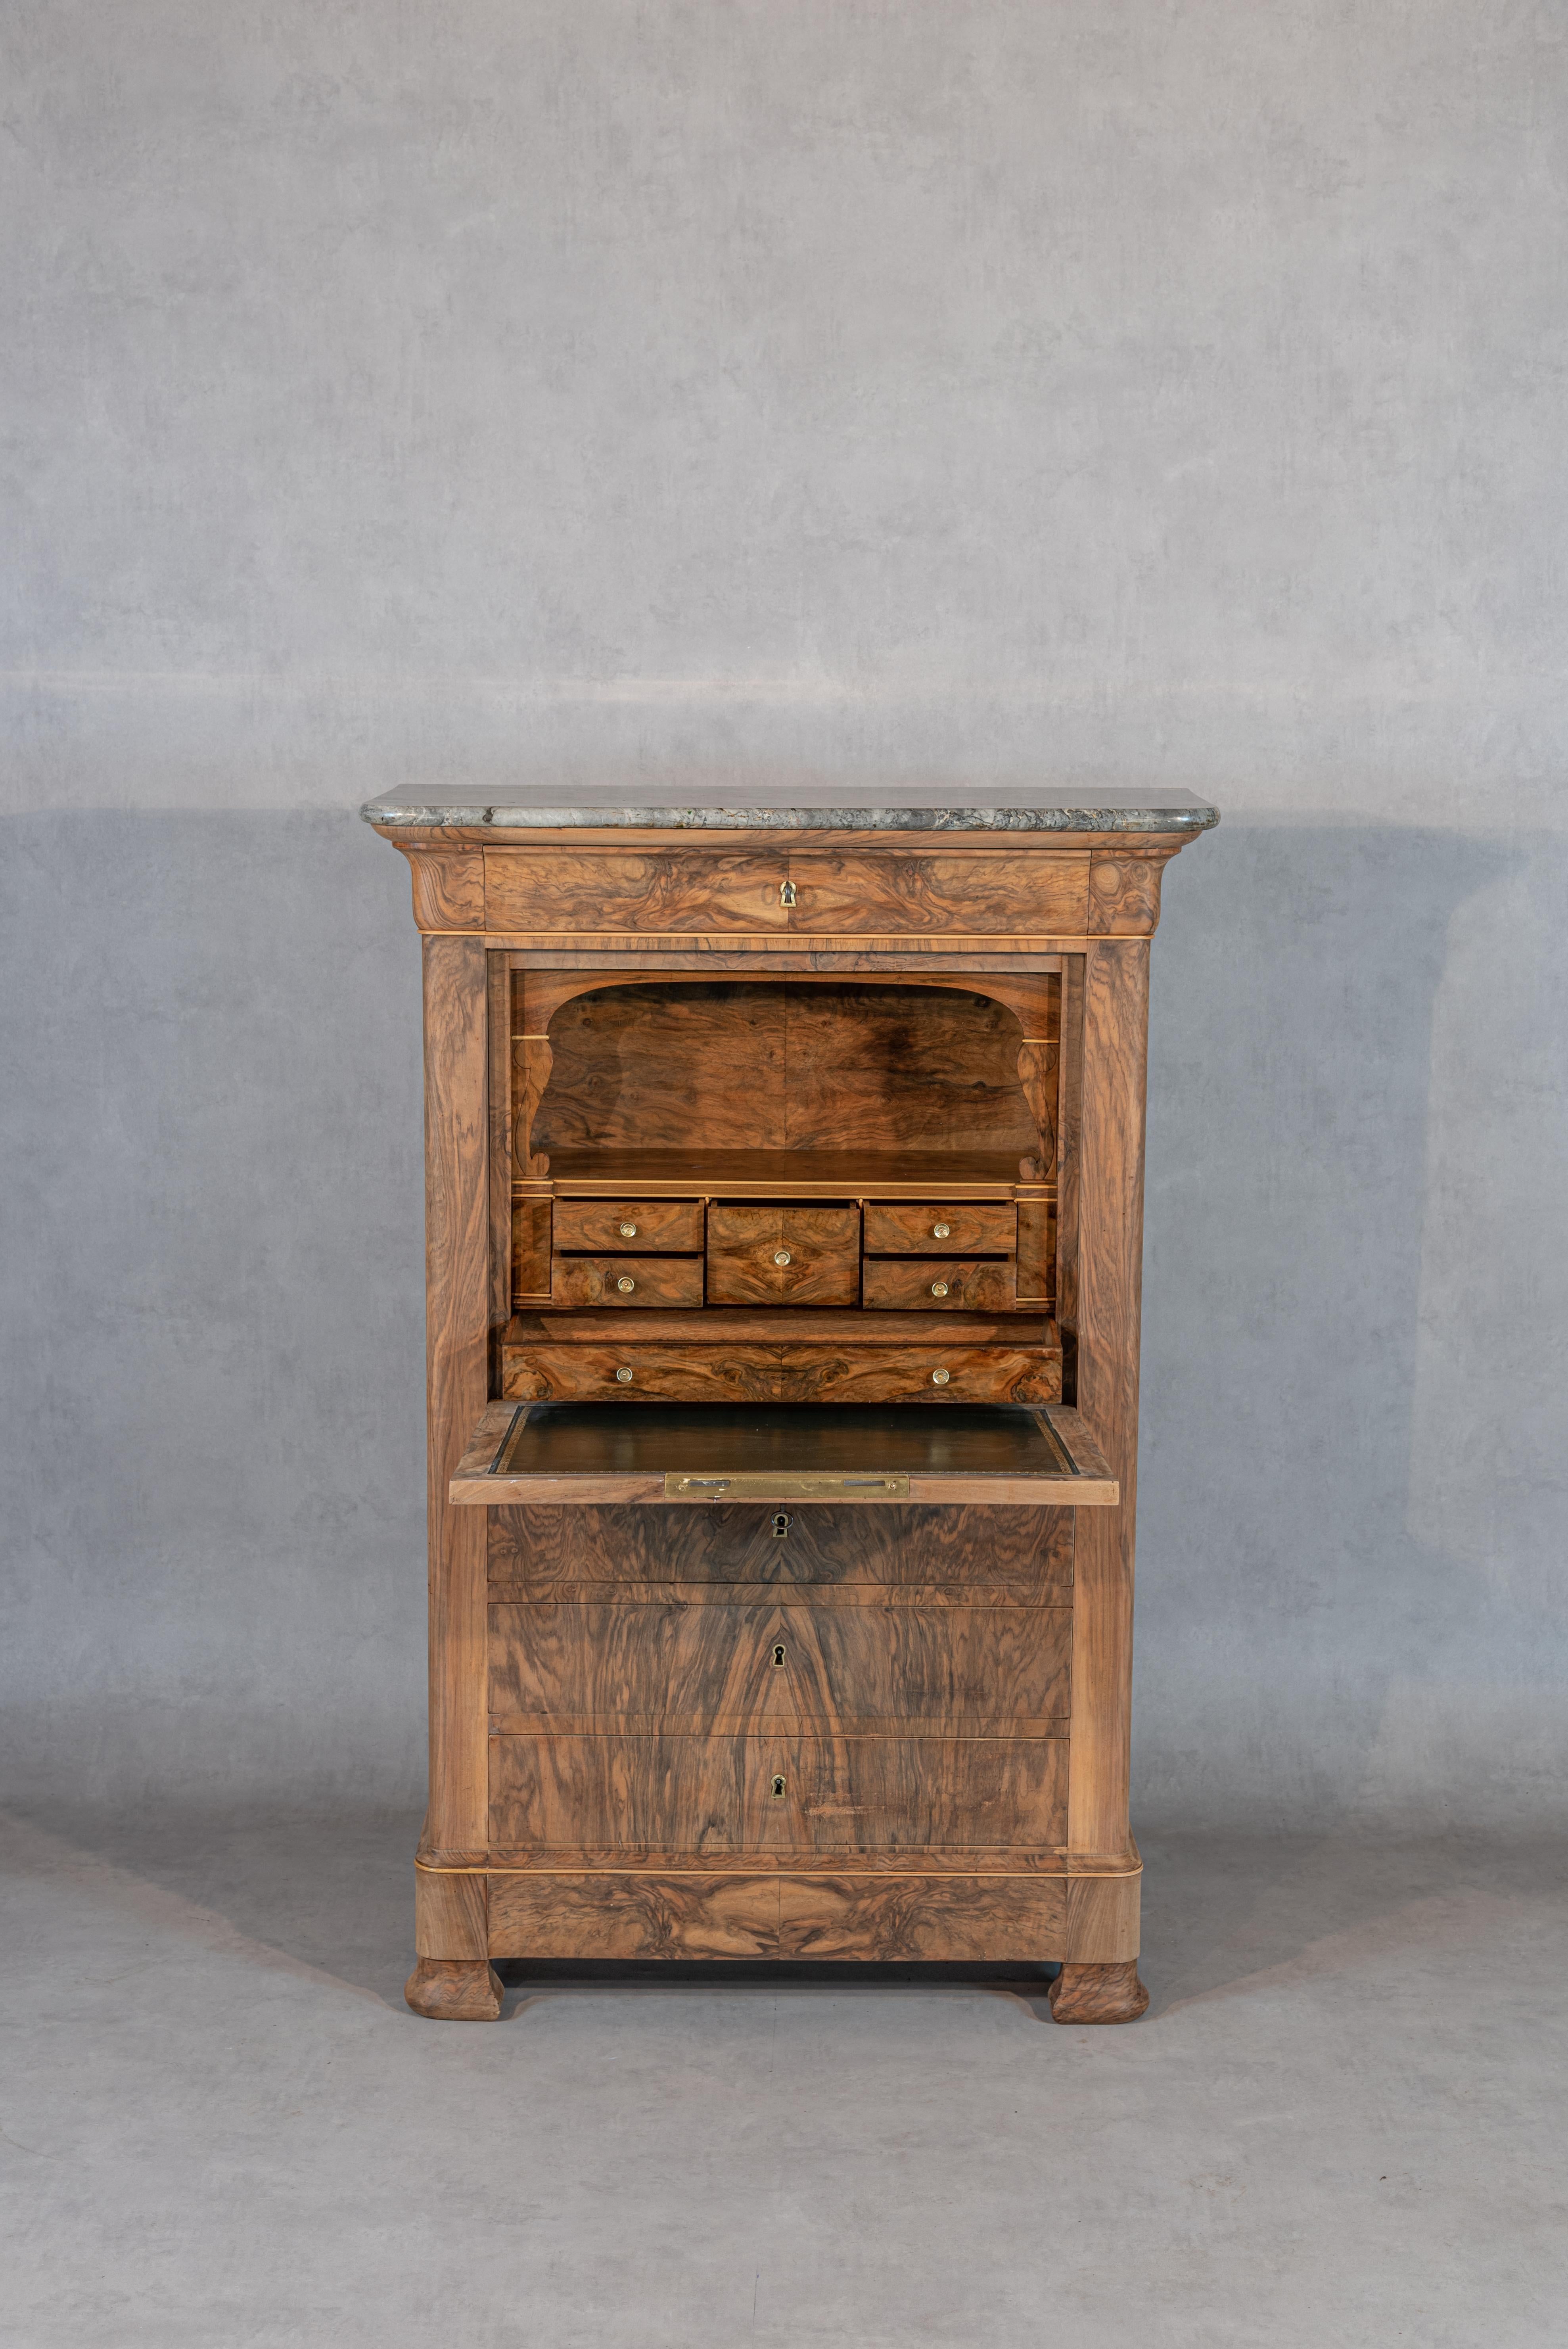 
Step into a world of refined elegance with this Antique Louis-Philippe Period French Secretary, meticulously restored to its former glory. The restoration has brought out the authentic craftsmanship of the Louis-Philippe era, showcasing the piece's